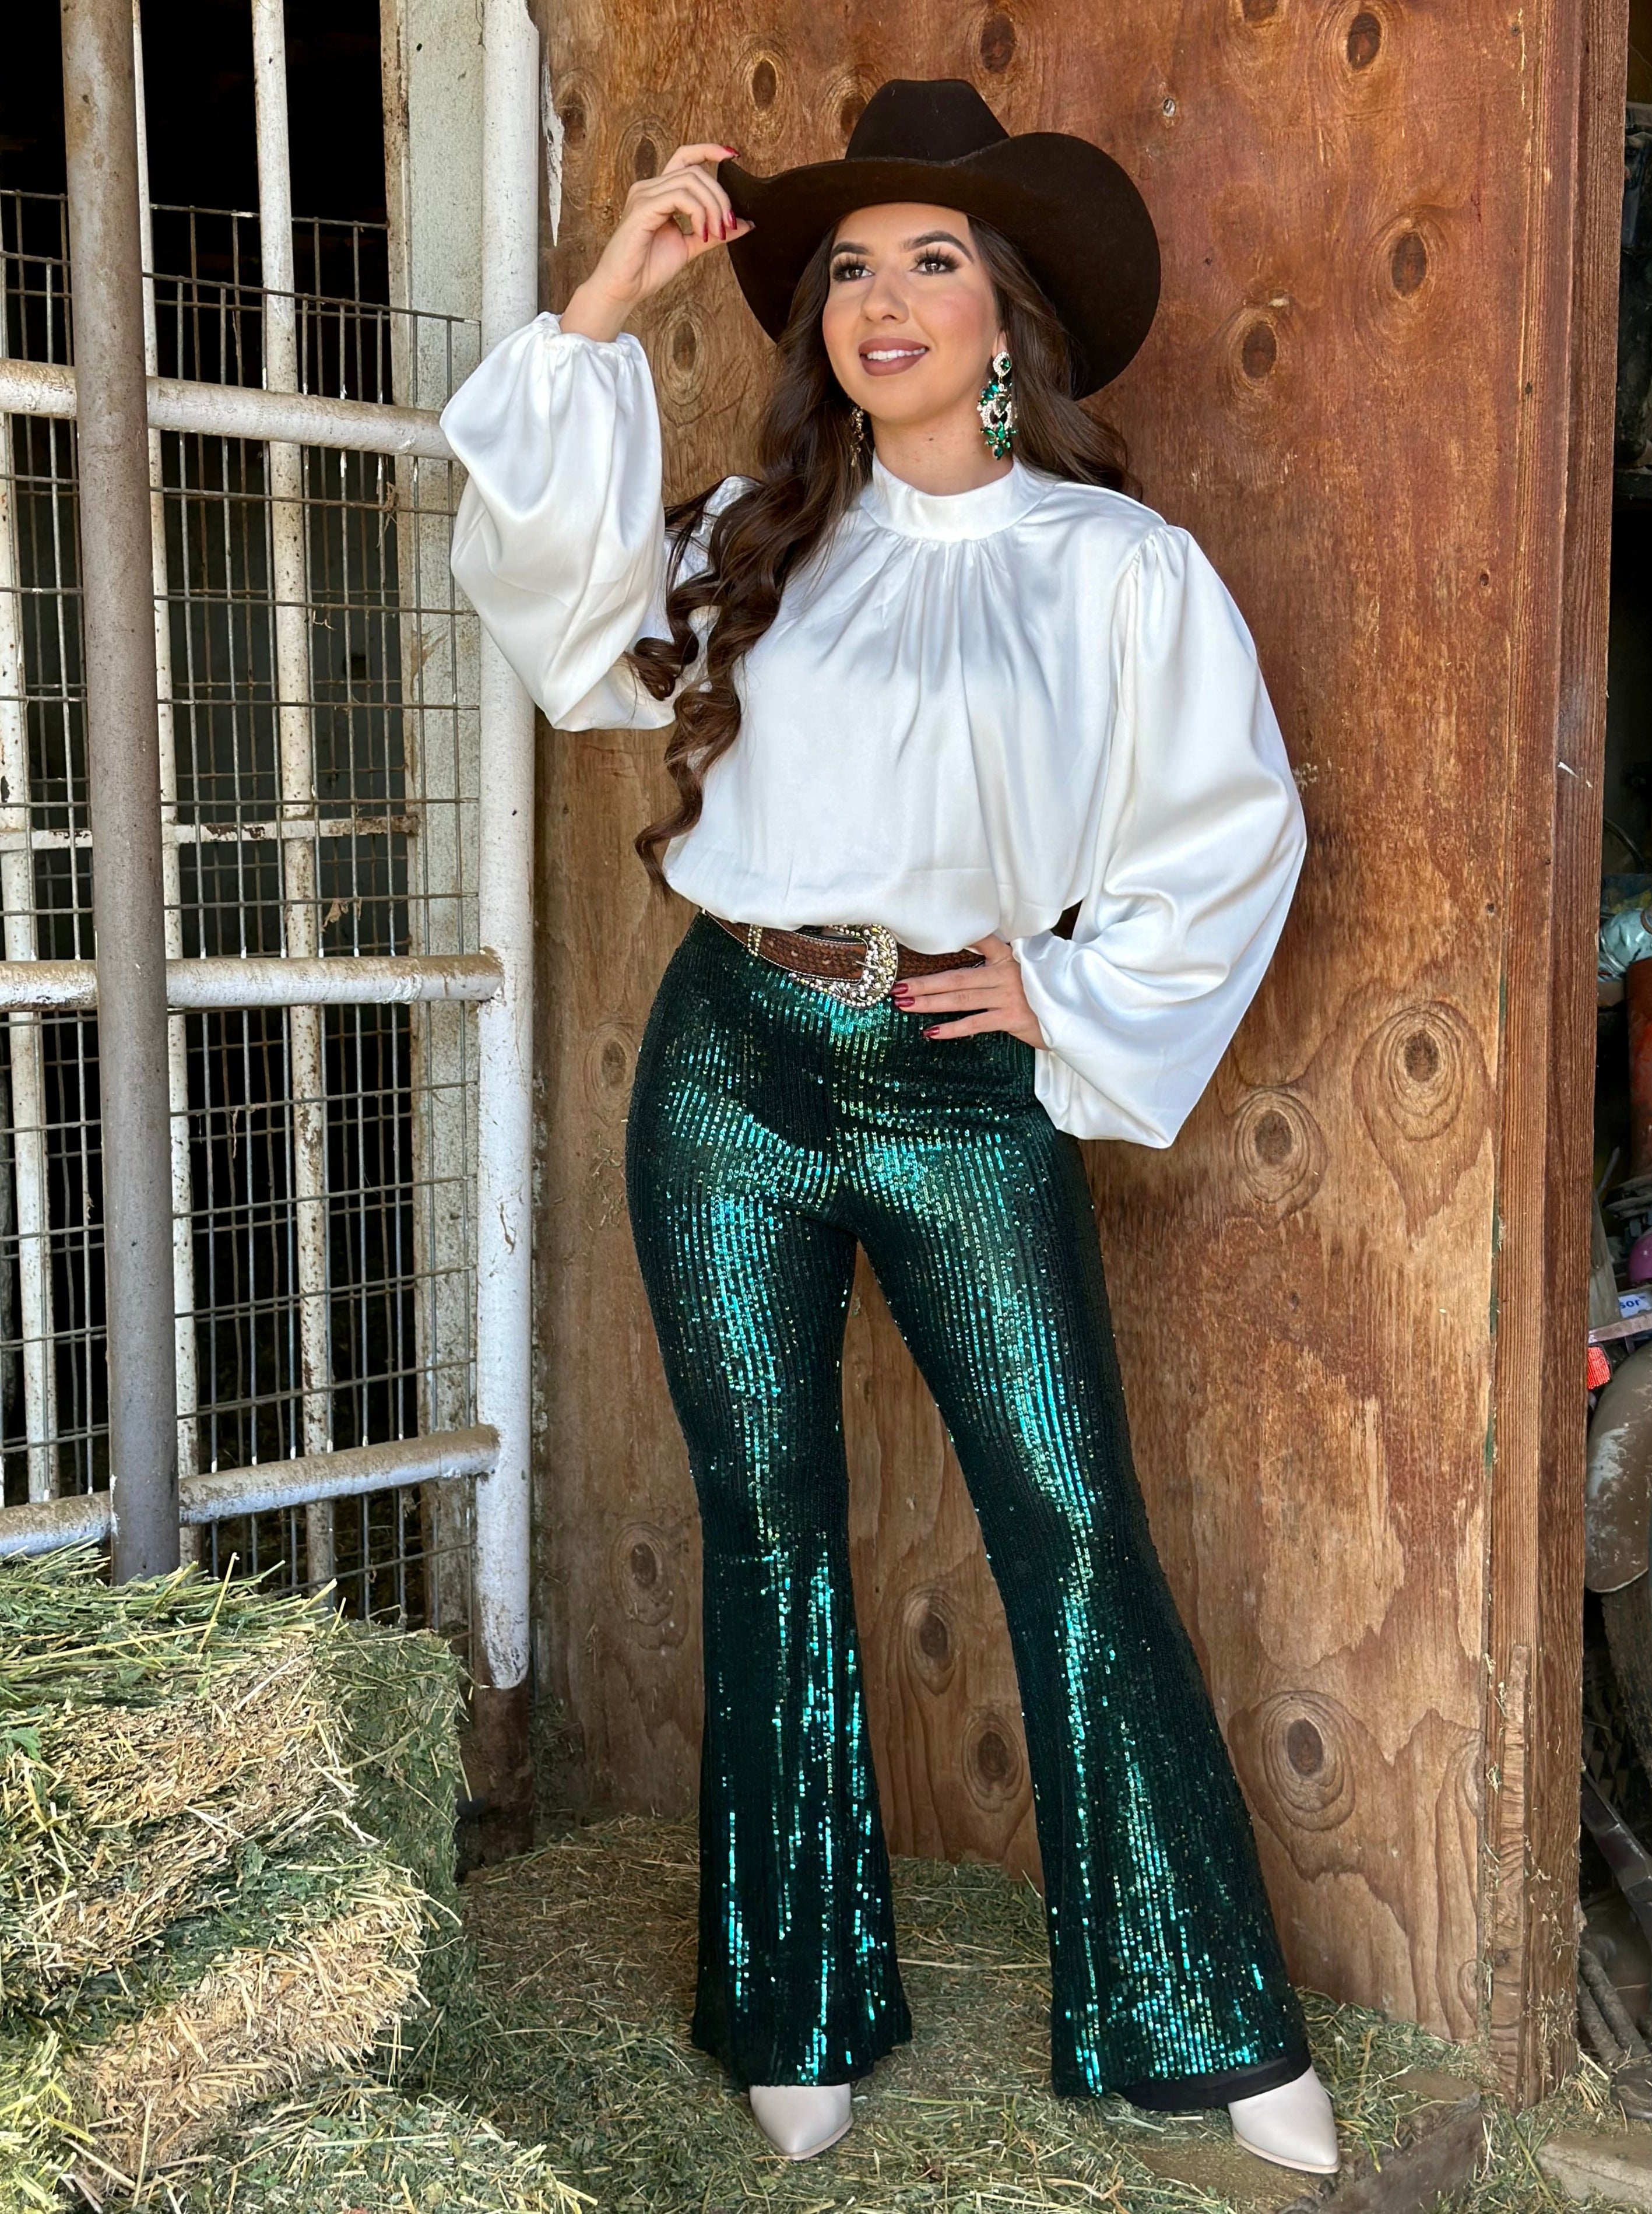 Deliza Pants - Mid Waisted Sequin Flare Pants in Iridescent White